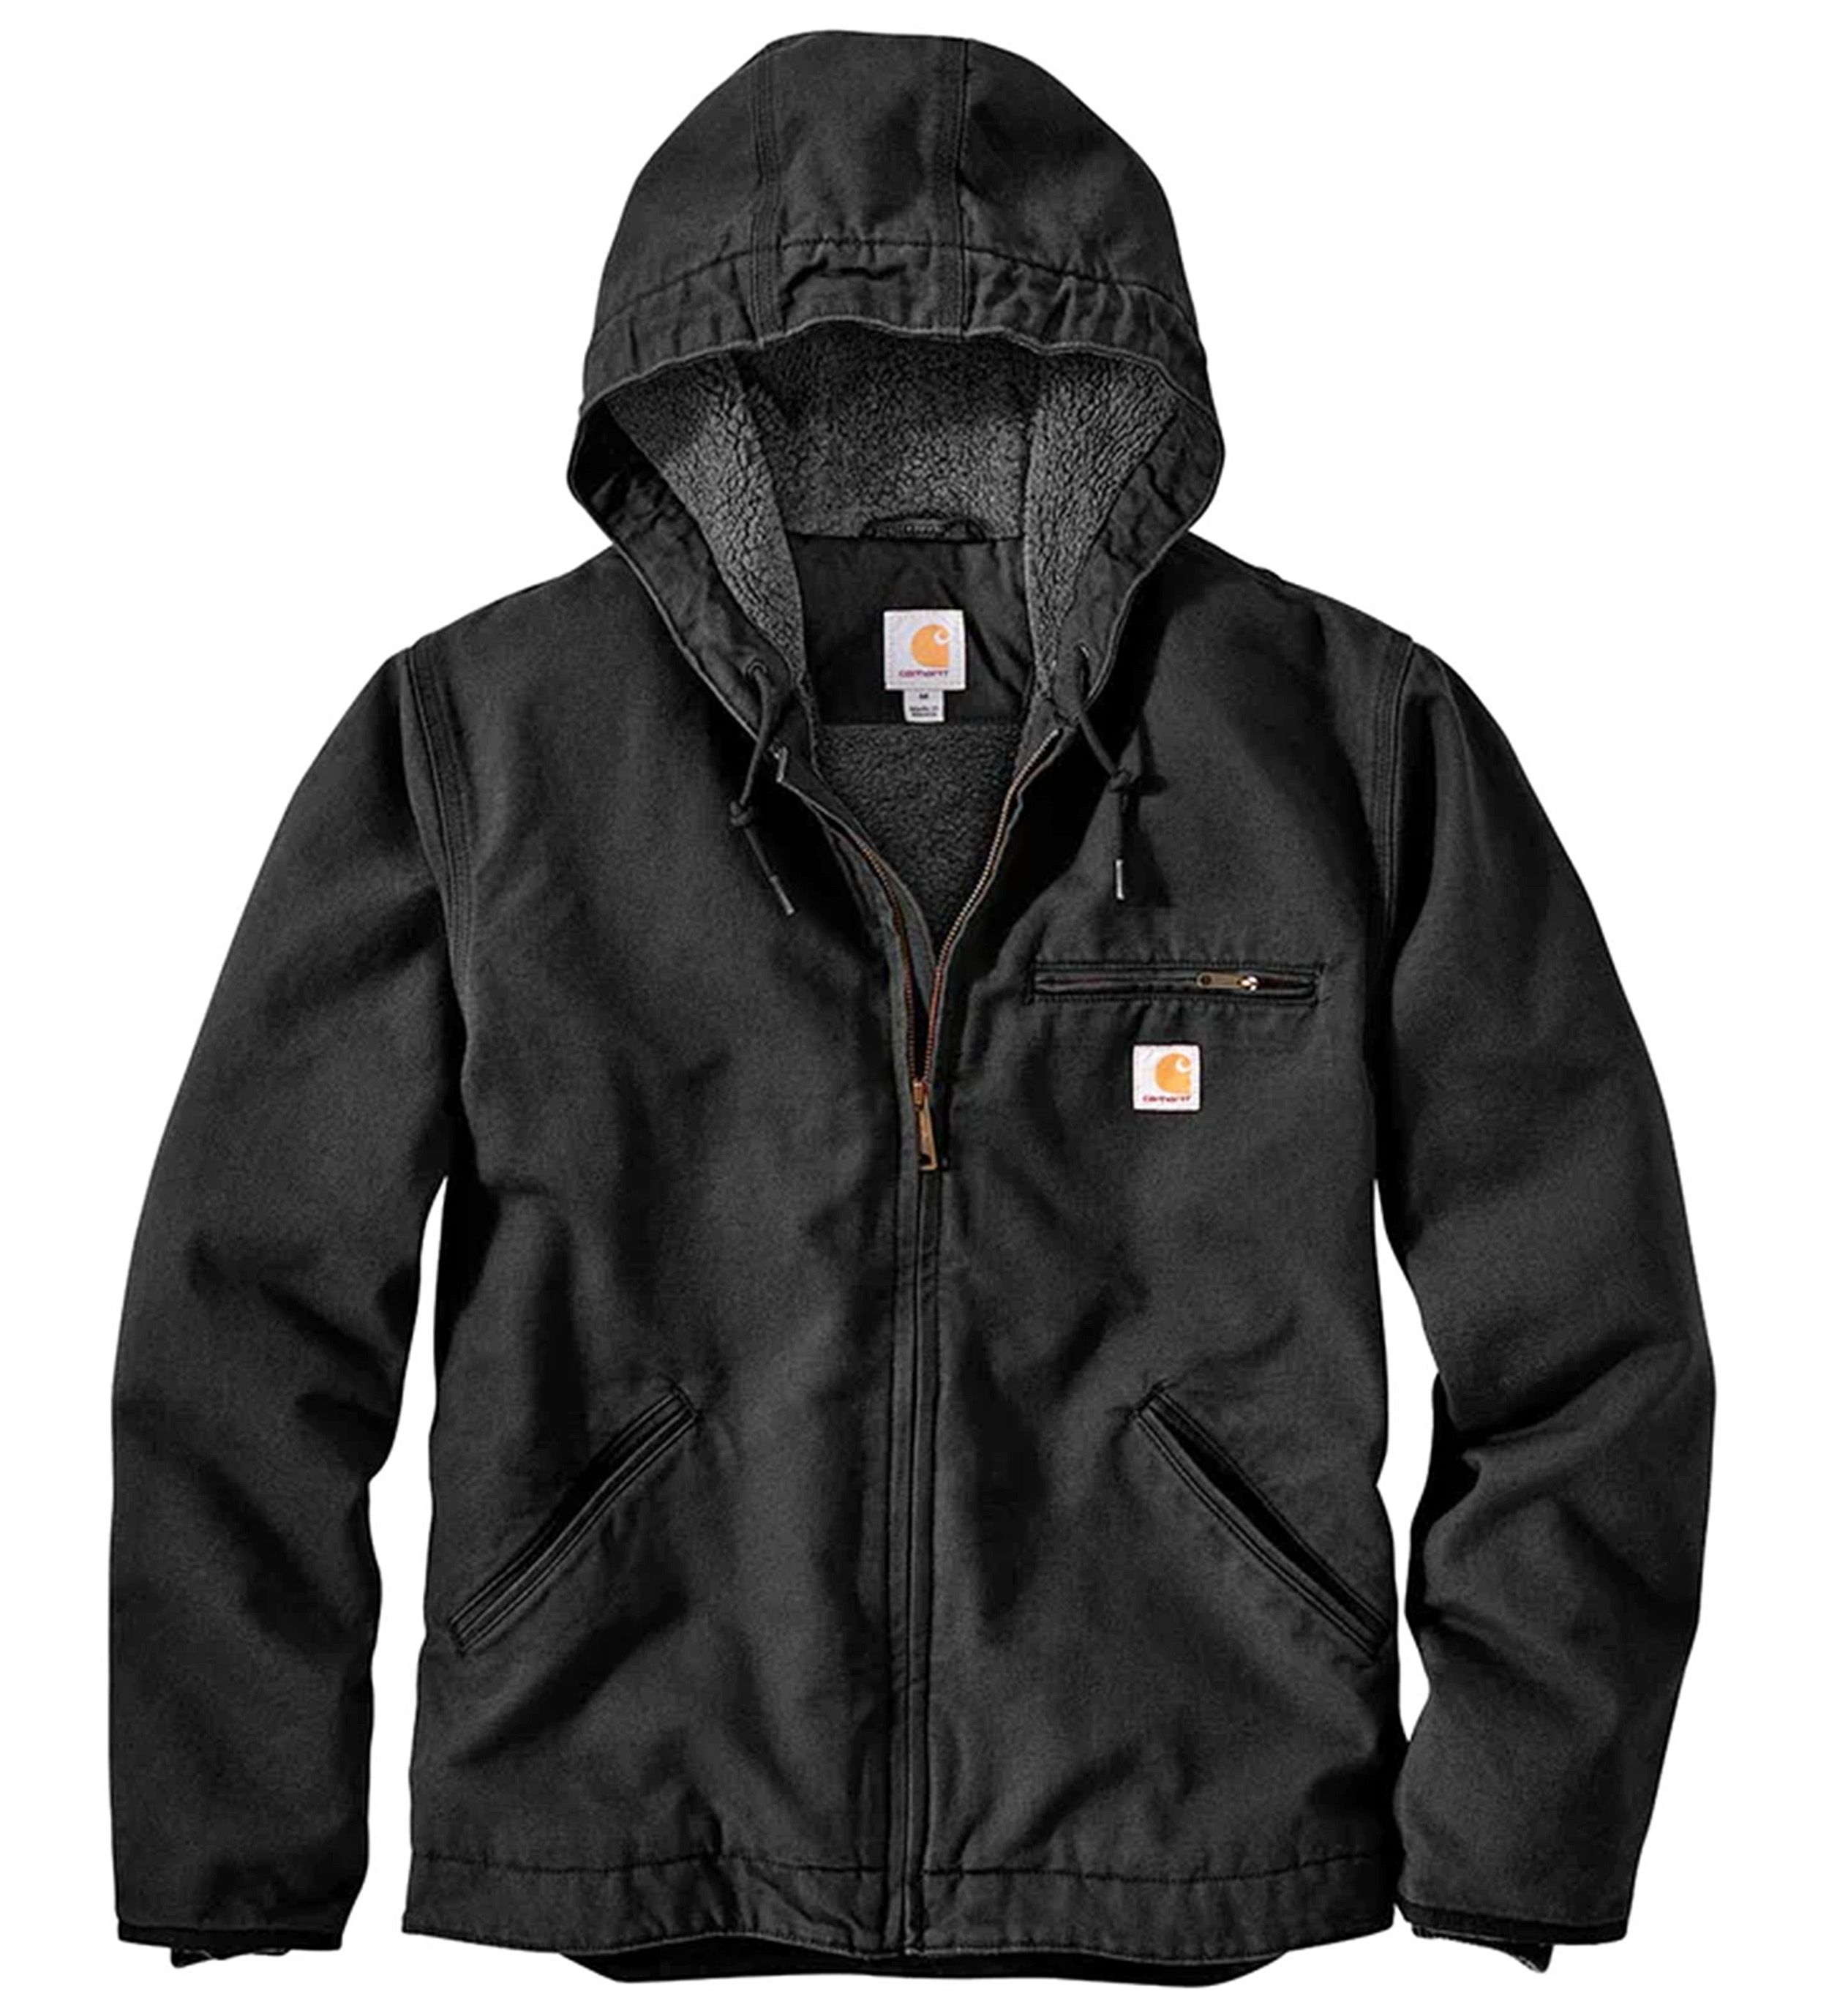 Carhartt winter sale — 3 great deals I'd buy right now